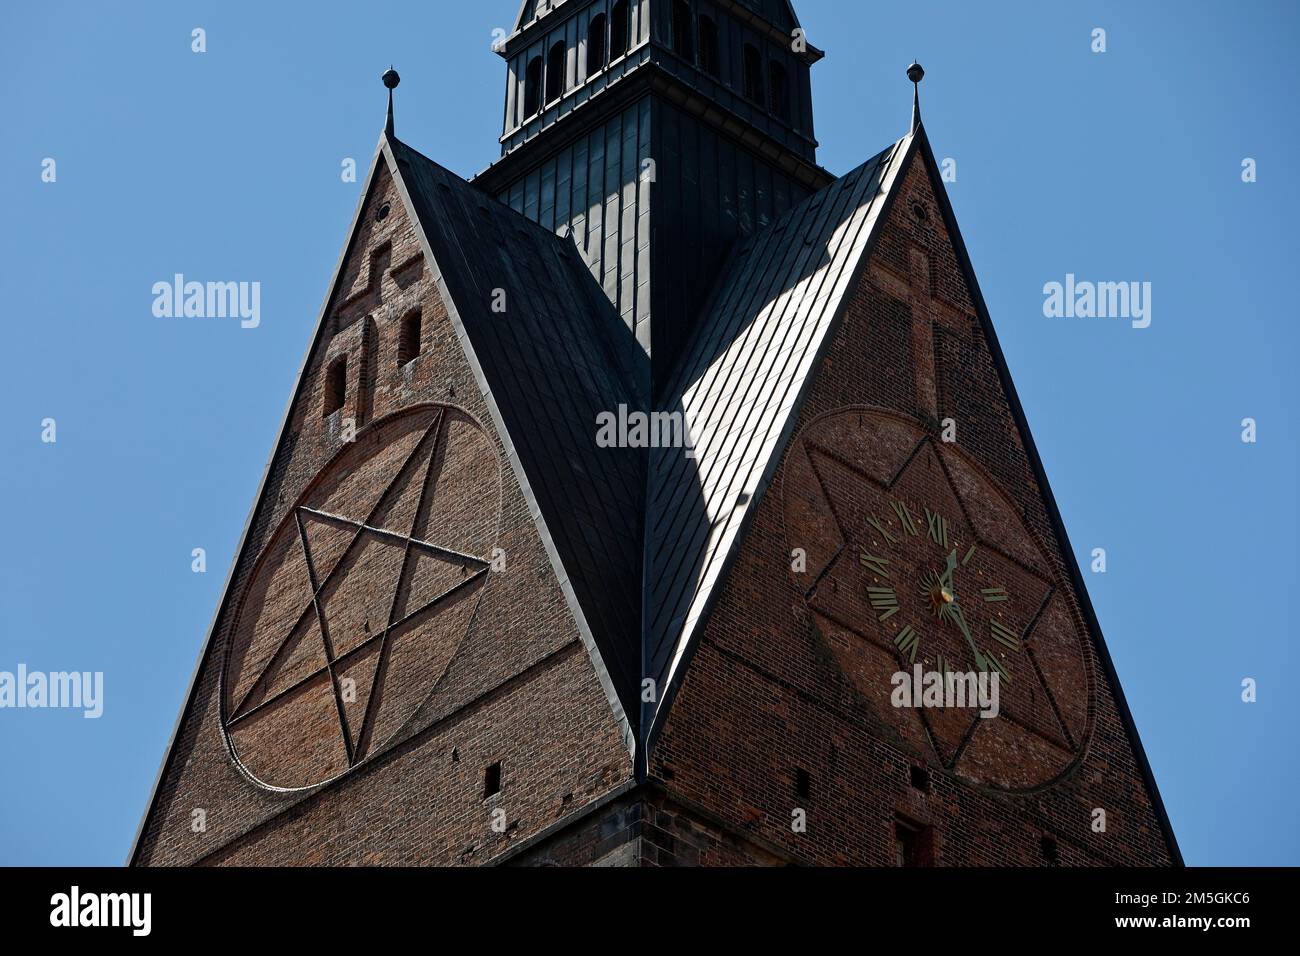 Tower detail of the Marktkirche St. Georgii et Jacobi with hexagram and tower clock, state capital Hannover, Lower Saxony, Germany Stock Photo